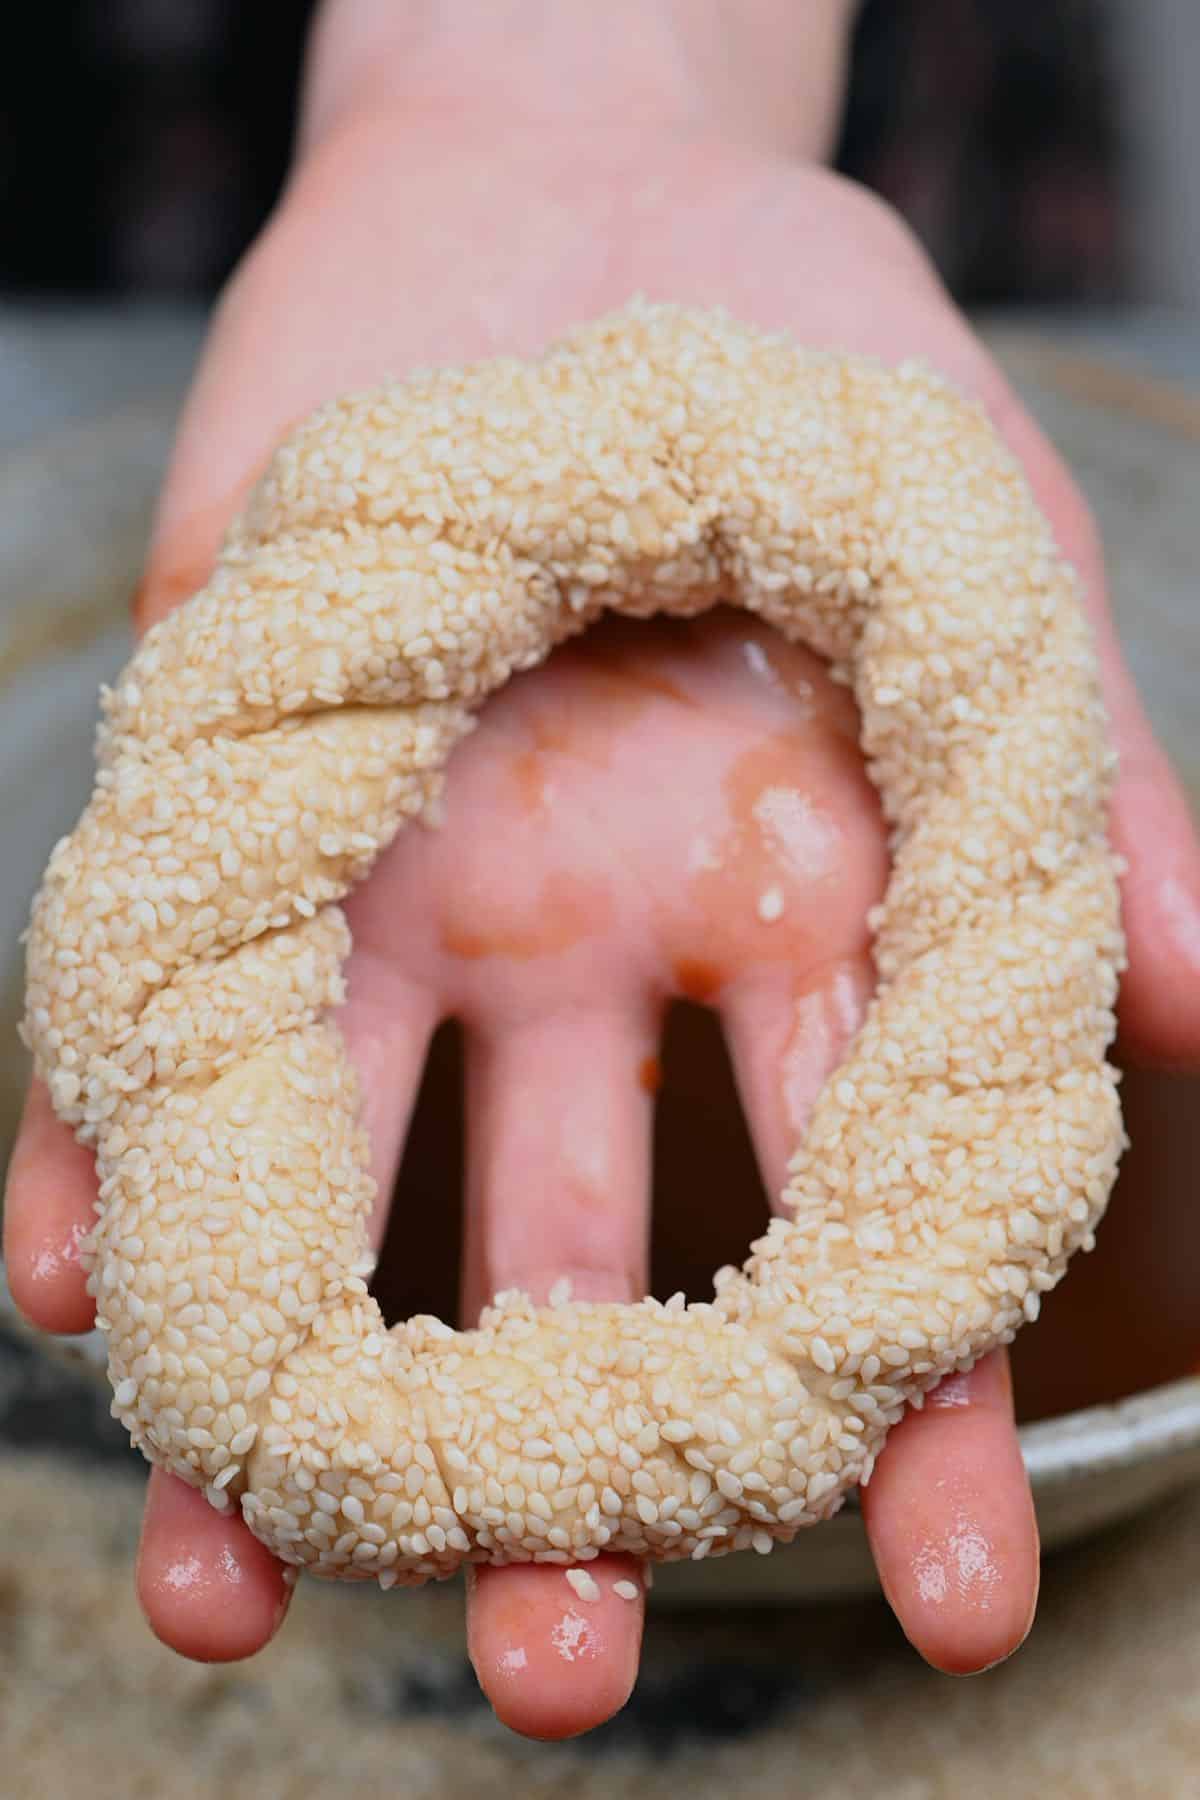 Simit Turkish bagel ring coated with sesame seeds